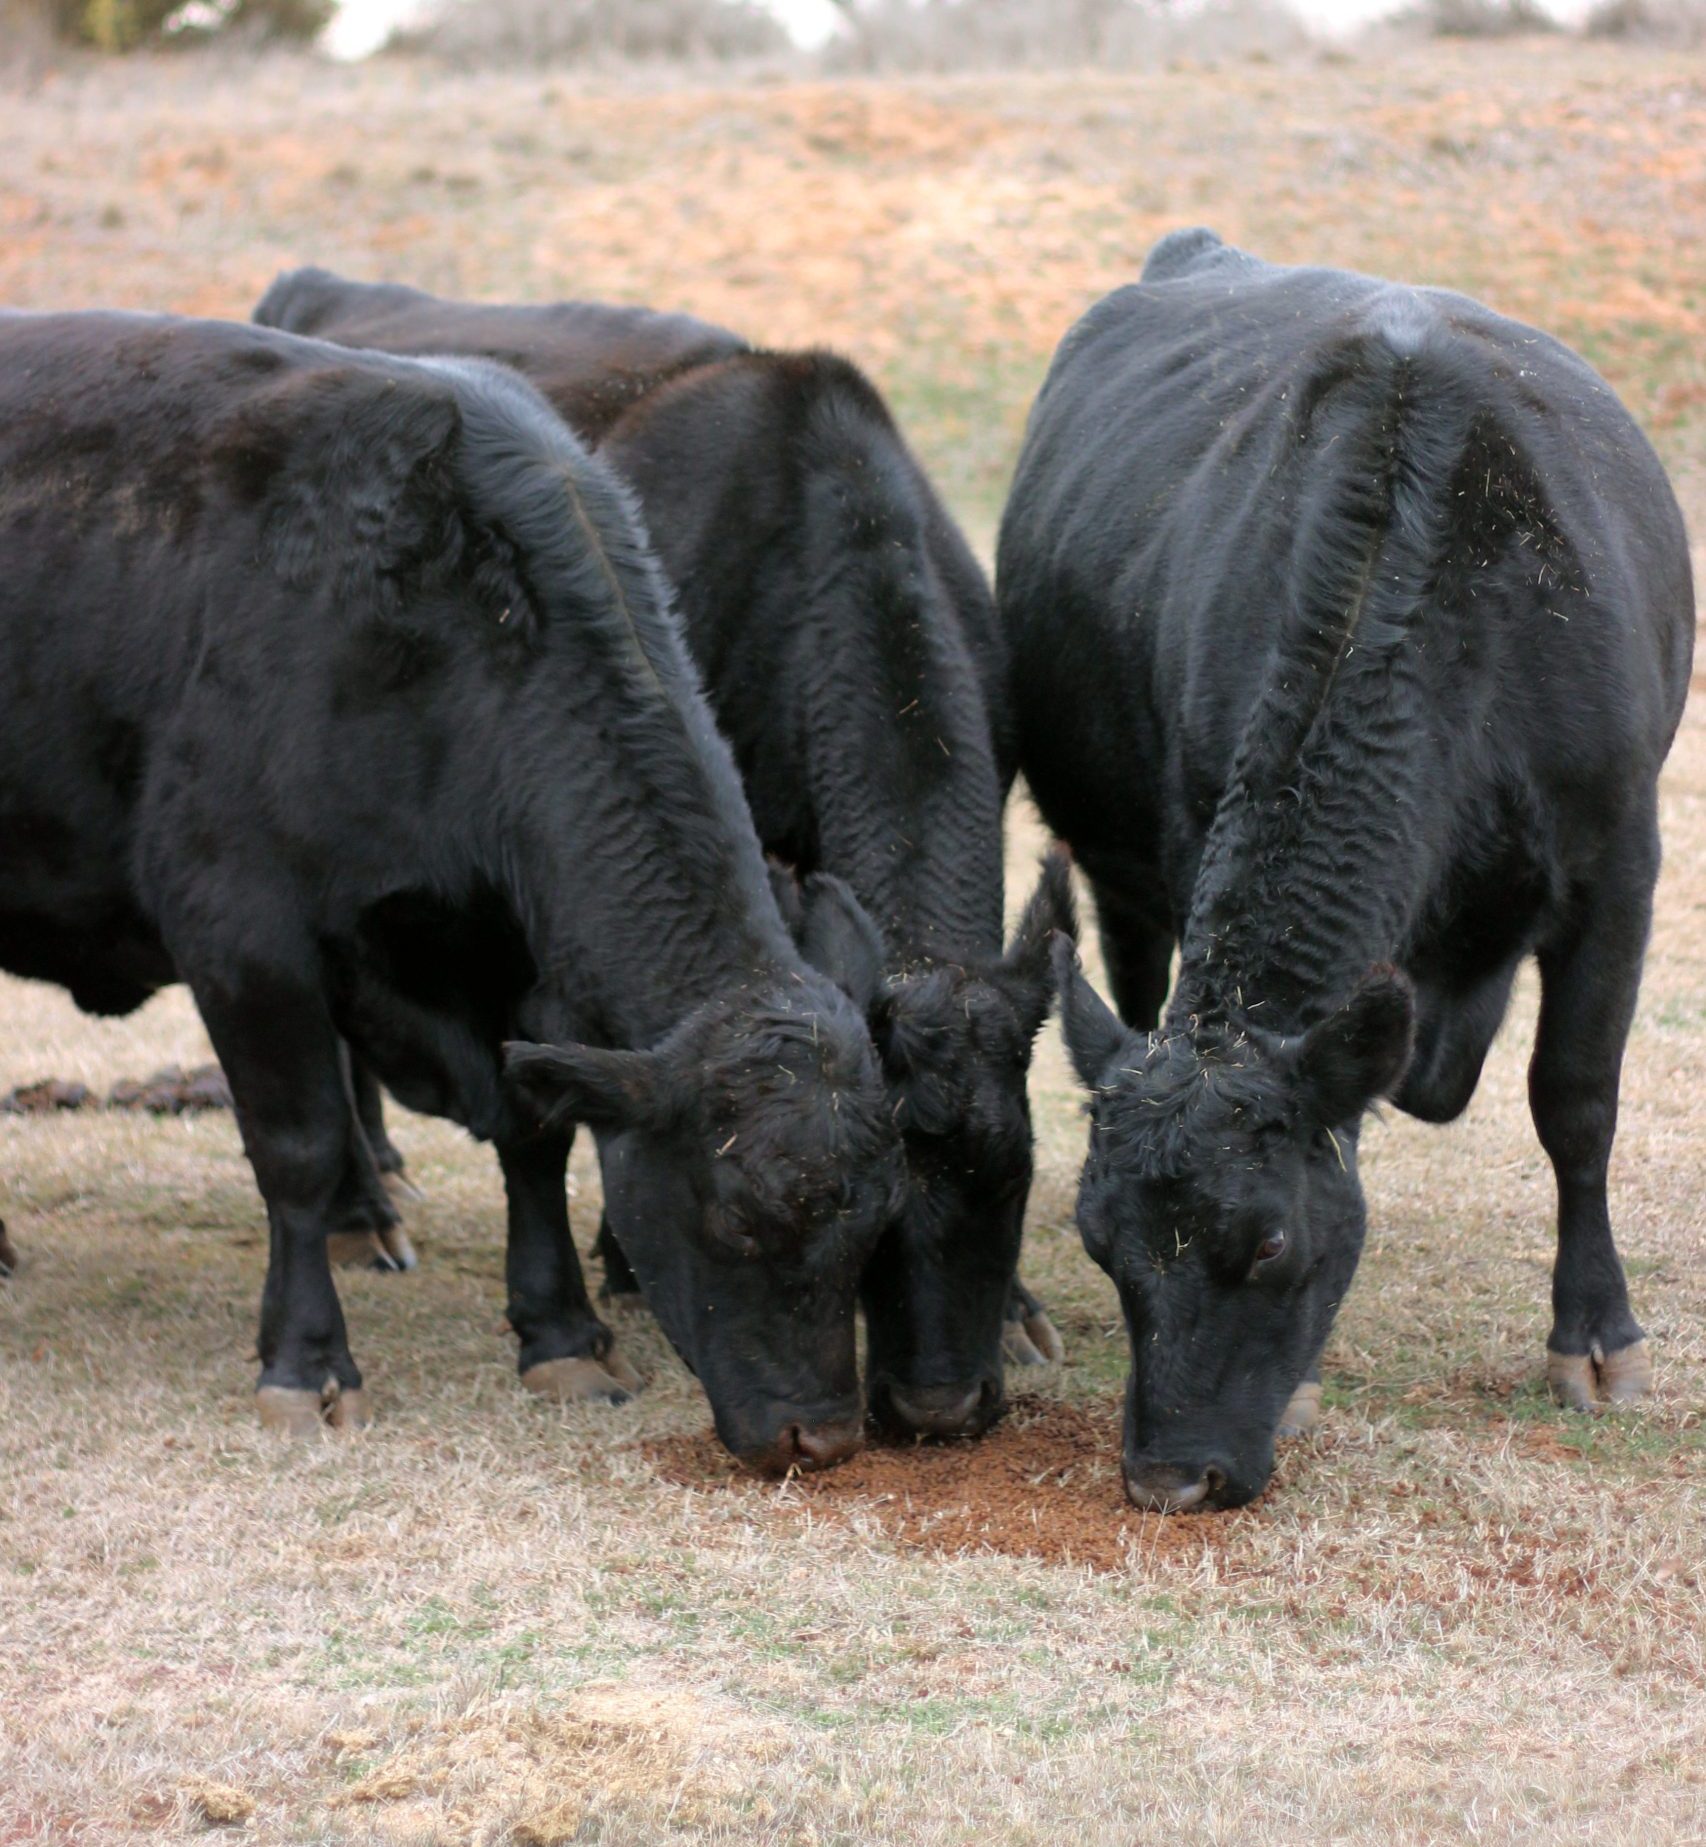 Anthrax infections in cattle can strike quickly and without warning. North Dakota has seen 25 cases this year that led to the deaths of 170 cattle. (Journal photo by Lacey Vilhauer.)